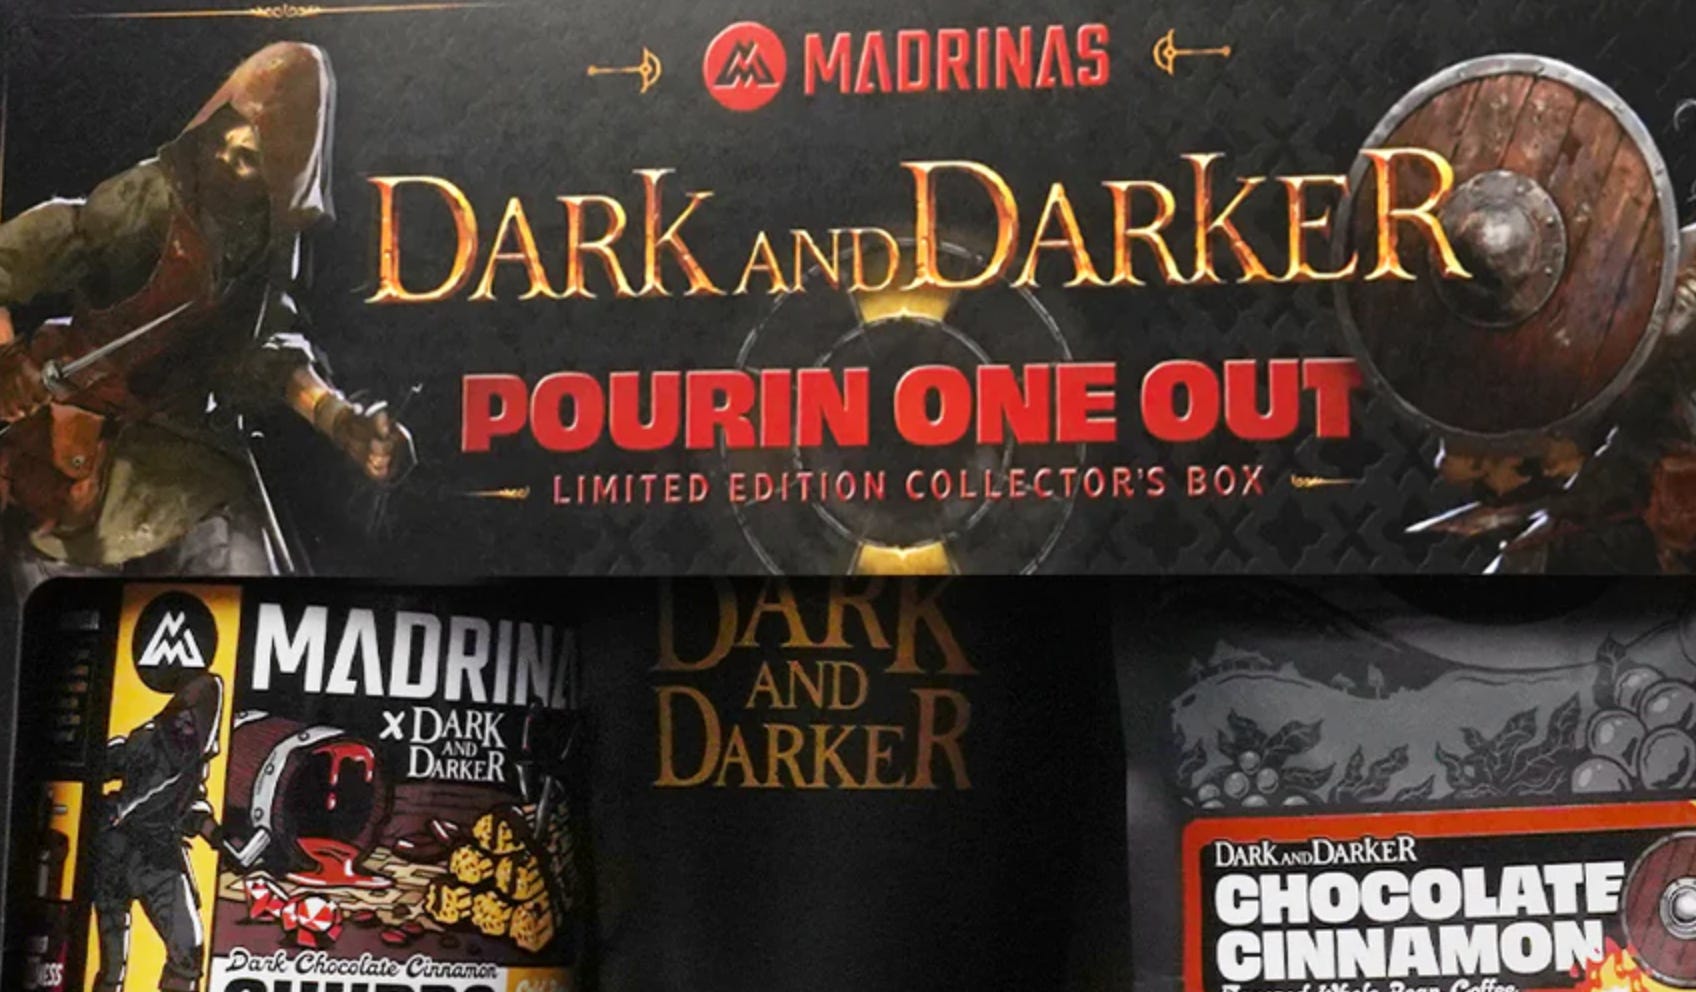 Dark and Darker has its own coffee now